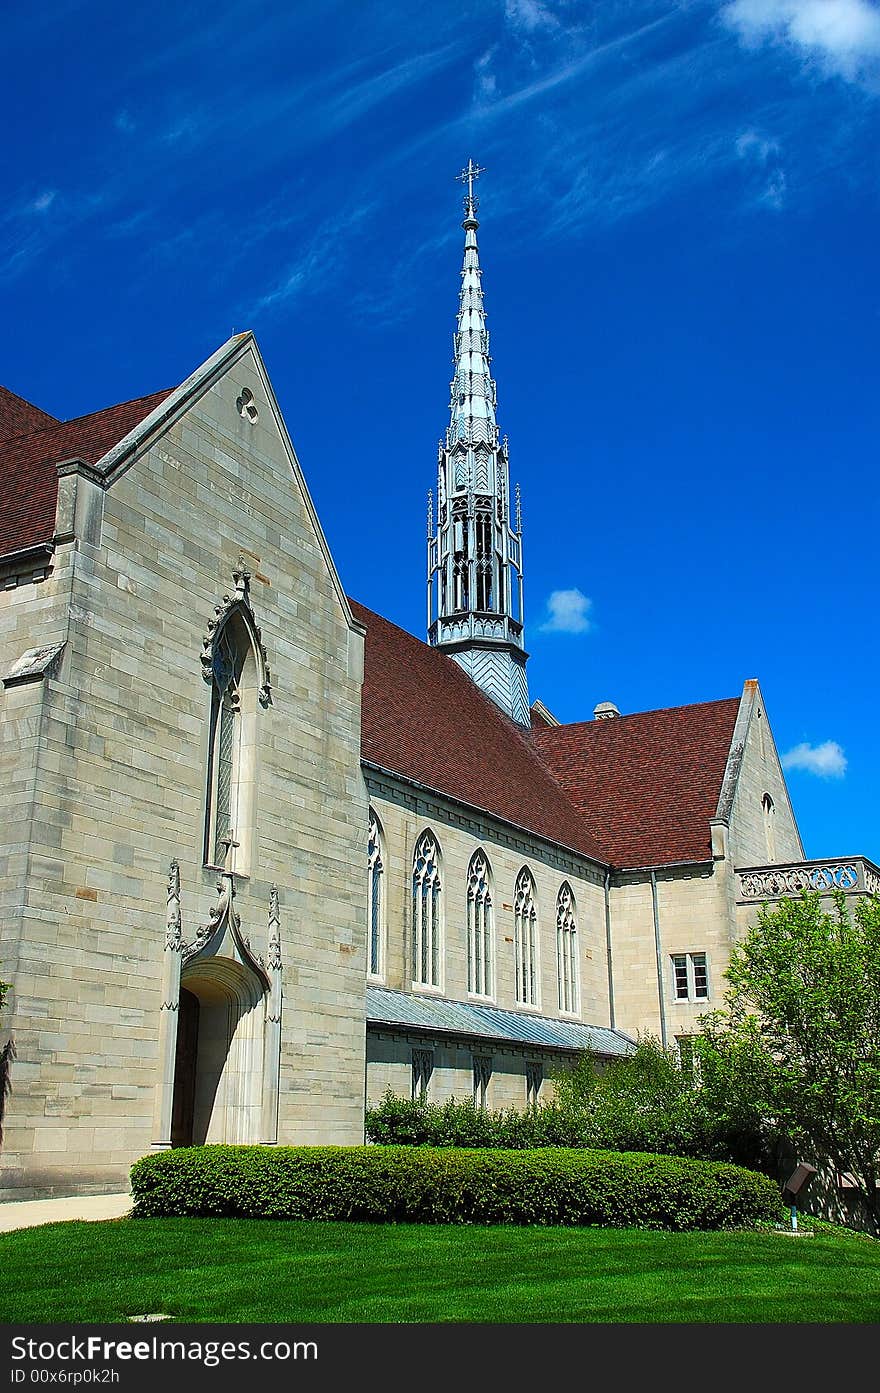 This picture was taken at a church in Indianapolis. Gothic architecture is a style of architecture which flourished during the high and late medieval period. It evolved from Romanesque architecture and was succeeded by Renaissance architecture. Originating in 12th-century France and lasting into the 16th century, Gothic architecture was known during the period as the French Style (Opus Francigenum), with the term Gothic first appearing during the latter part of the Renaissance as a stylistic insult. Its characteristic features include the pointed arch, the ribbed vault and the flying buttress. Gothic architecture is most familiar as the architecture of many of the great cathedrals, abbeys and parish churches of Europe. It is also the architecture of many castles, palaces, town halls, guild halls, universities, and to a less prominent extent, private dwellings. It is in the great churches and cathedrals and in a number of civic buildings that the Gothic style was expressed most powerfully, its characteristics lending themselves to appeal to the emotions. A great number of ecclesiastical buildings remain from this period, of which even the smallest are often structures of architectural distinction while many of the larger churches are considered priceless works of art and are listed with UNESCO as World Heritage Sites. For this reason a study of Gothic architecture is largely a study of cathedrals and churches. This picture was taken at a church in Indianapolis. Gothic architecture is a style of architecture which flourished during the high and late medieval period. It evolved from Romanesque architecture and was succeeded by Renaissance architecture. Originating in 12th-century France and lasting into the 16th century, Gothic architecture was known during the period as the French Style (Opus Francigenum), with the term Gothic first appearing during the latter part of the Renaissance as a stylistic insult. Its characteristic features include the pointed arch, the ribbed vault and the flying buttress. Gothic architecture is most familiar as the architecture of many of the great cathedrals, abbeys and parish churches of Europe. It is also the architecture of many castles, palaces, town halls, guild halls, universities, and to a less prominent extent, private dwellings. It is in the great churches and cathedrals and in a number of civic buildings that the Gothic style was expressed most powerfully, its characteristics lending themselves to appeal to the emotions. A great number of ecclesiastical buildings remain from this period, of which even the smallest are often structures of architectural distinction while many of the larger churches are considered priceless works of art and are listed with UNESCO as World Heritage Sites. For this reason a study of Gothic architecture is largely a study of cathedrals and churches.